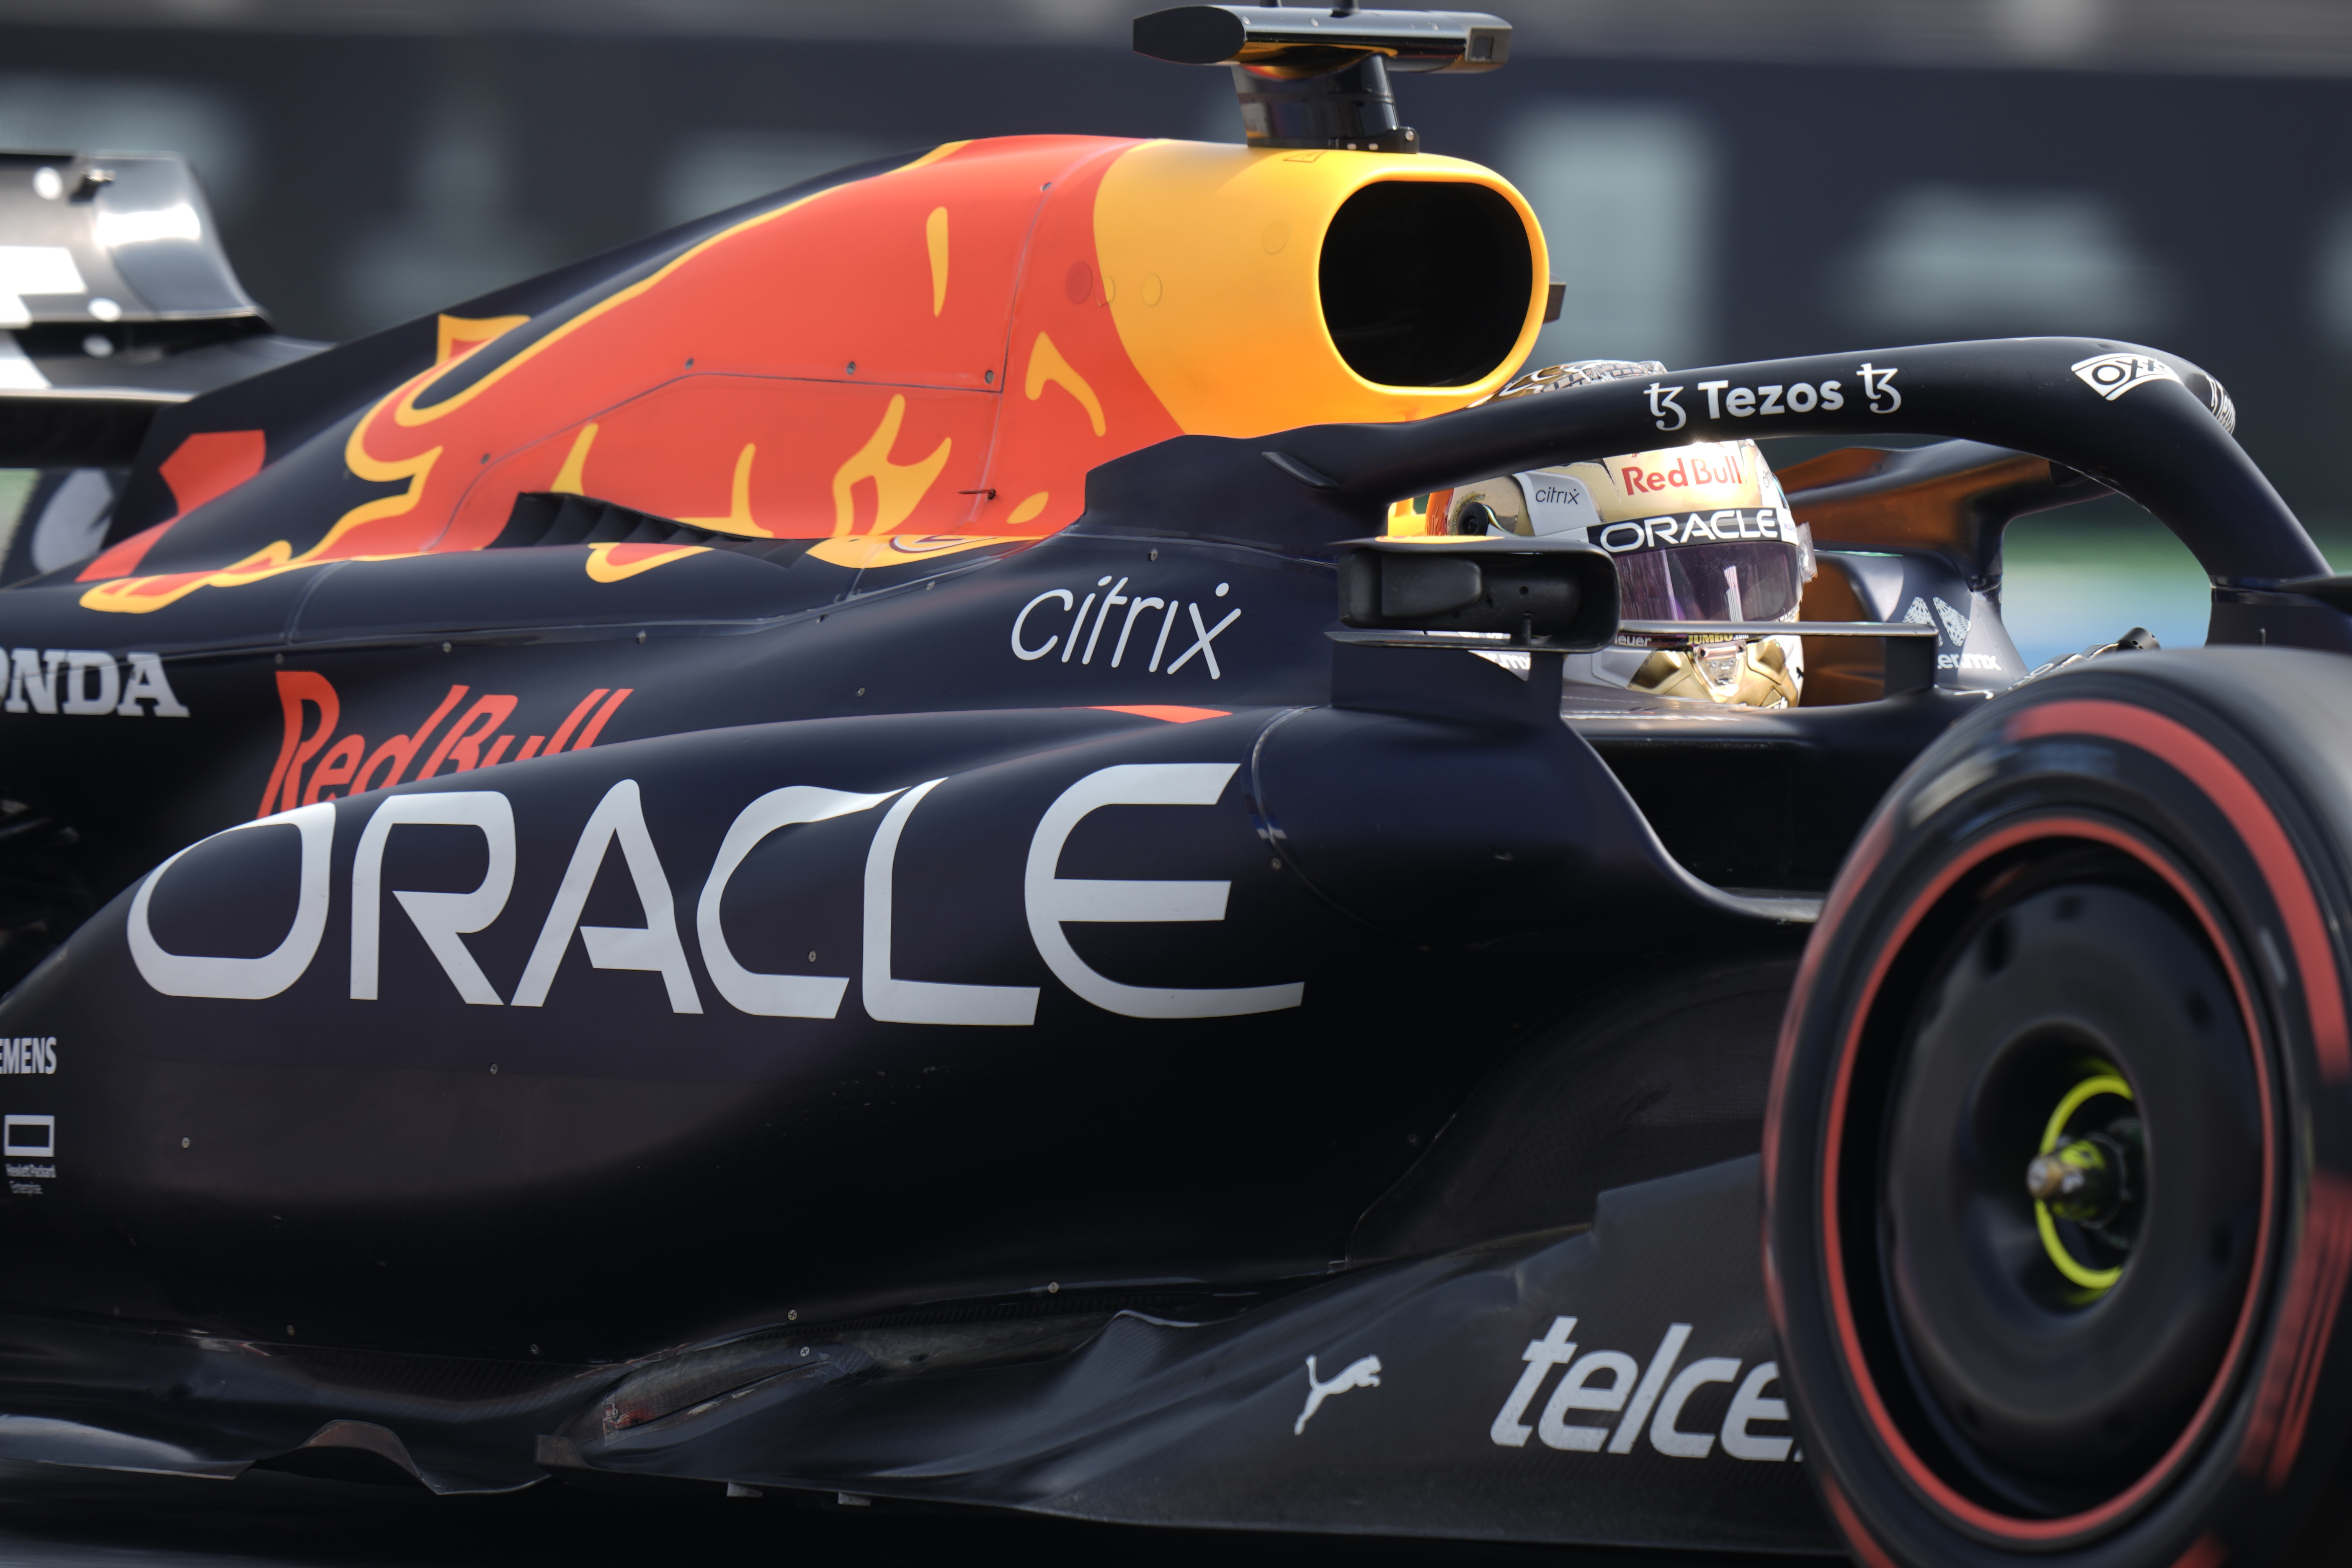 AT&T and Oracle Red Bull Racing - Global Business